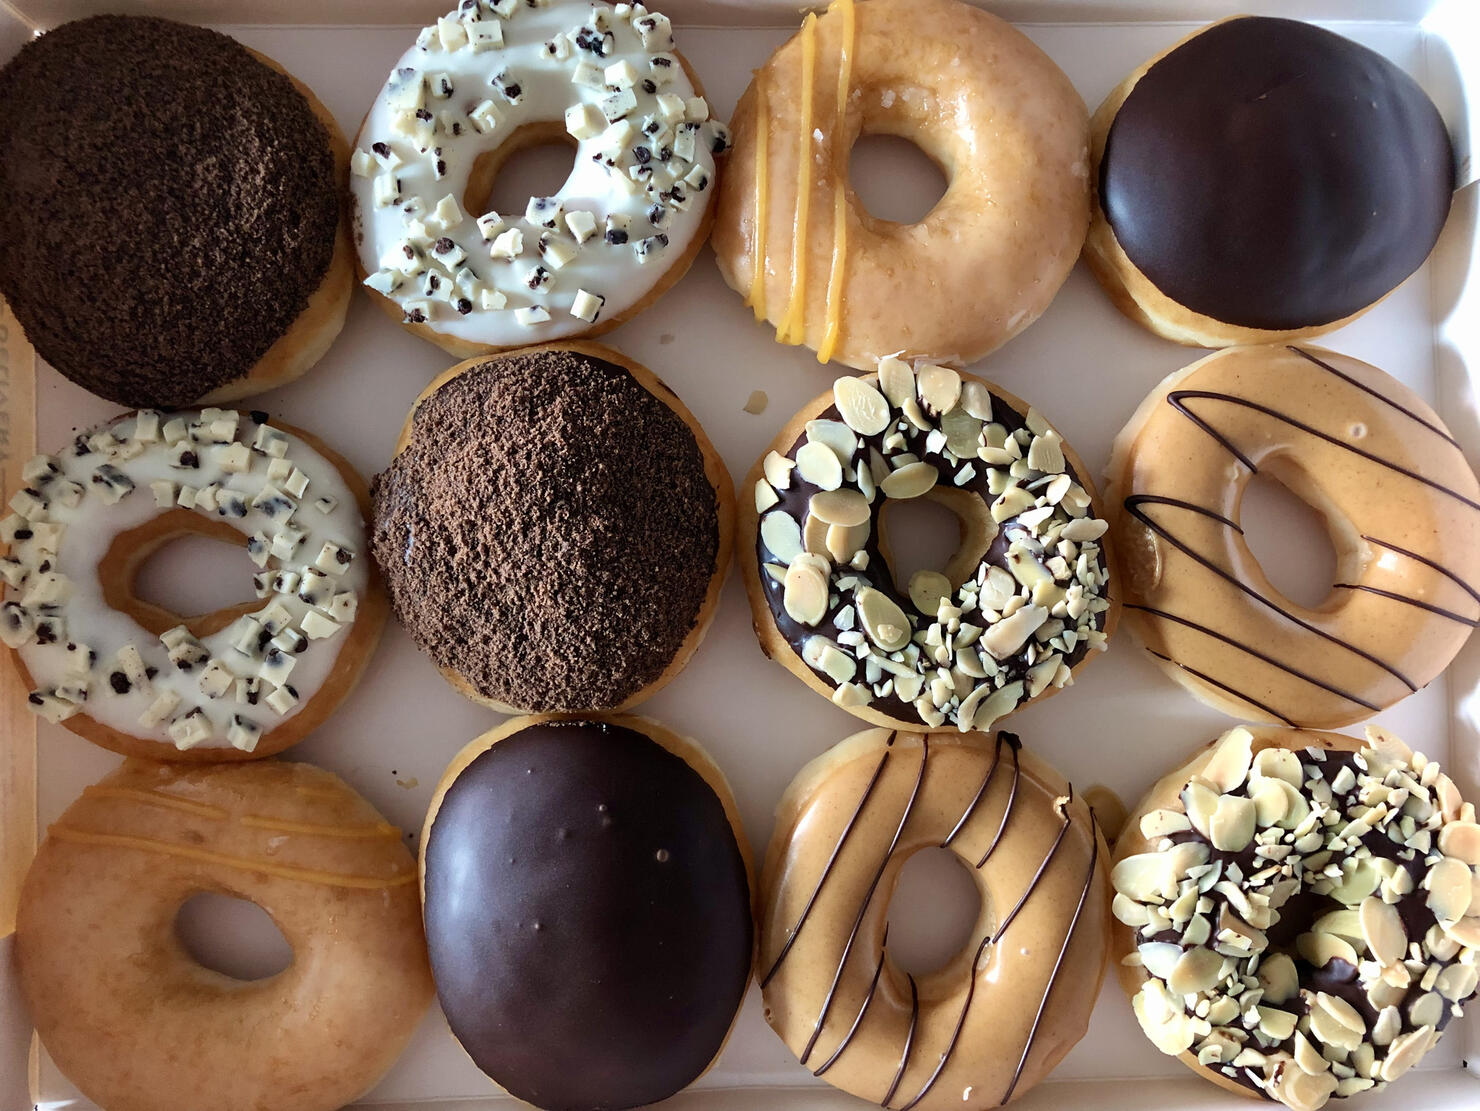 Donuts are good for sharing with family and friends.